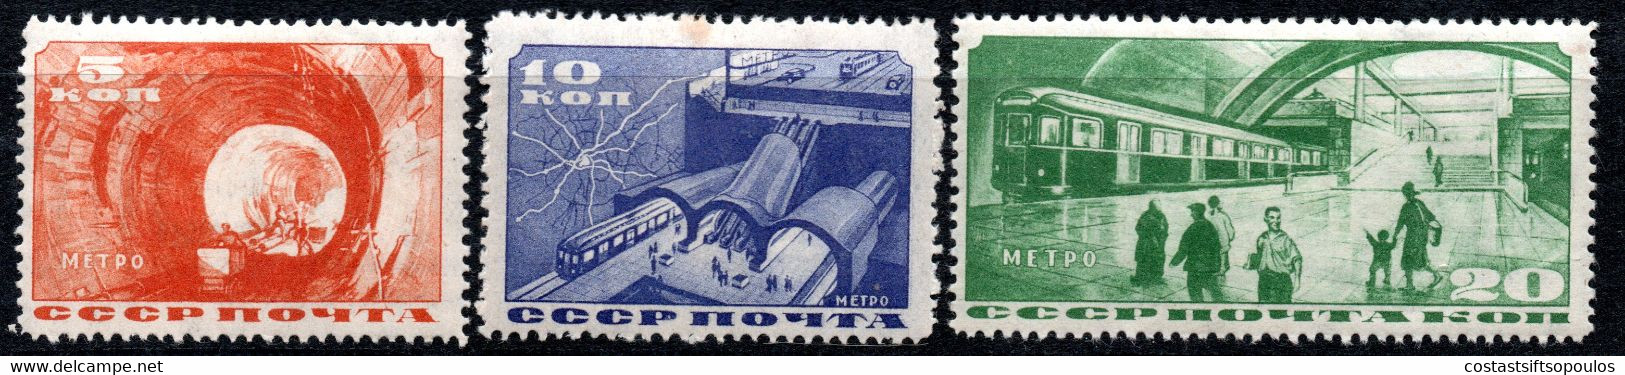 623.RUSSIA, 1935 MOSCOW SUBWAY.MICH.509,510,512,SC.551,552,554  MH - Unused Stamps